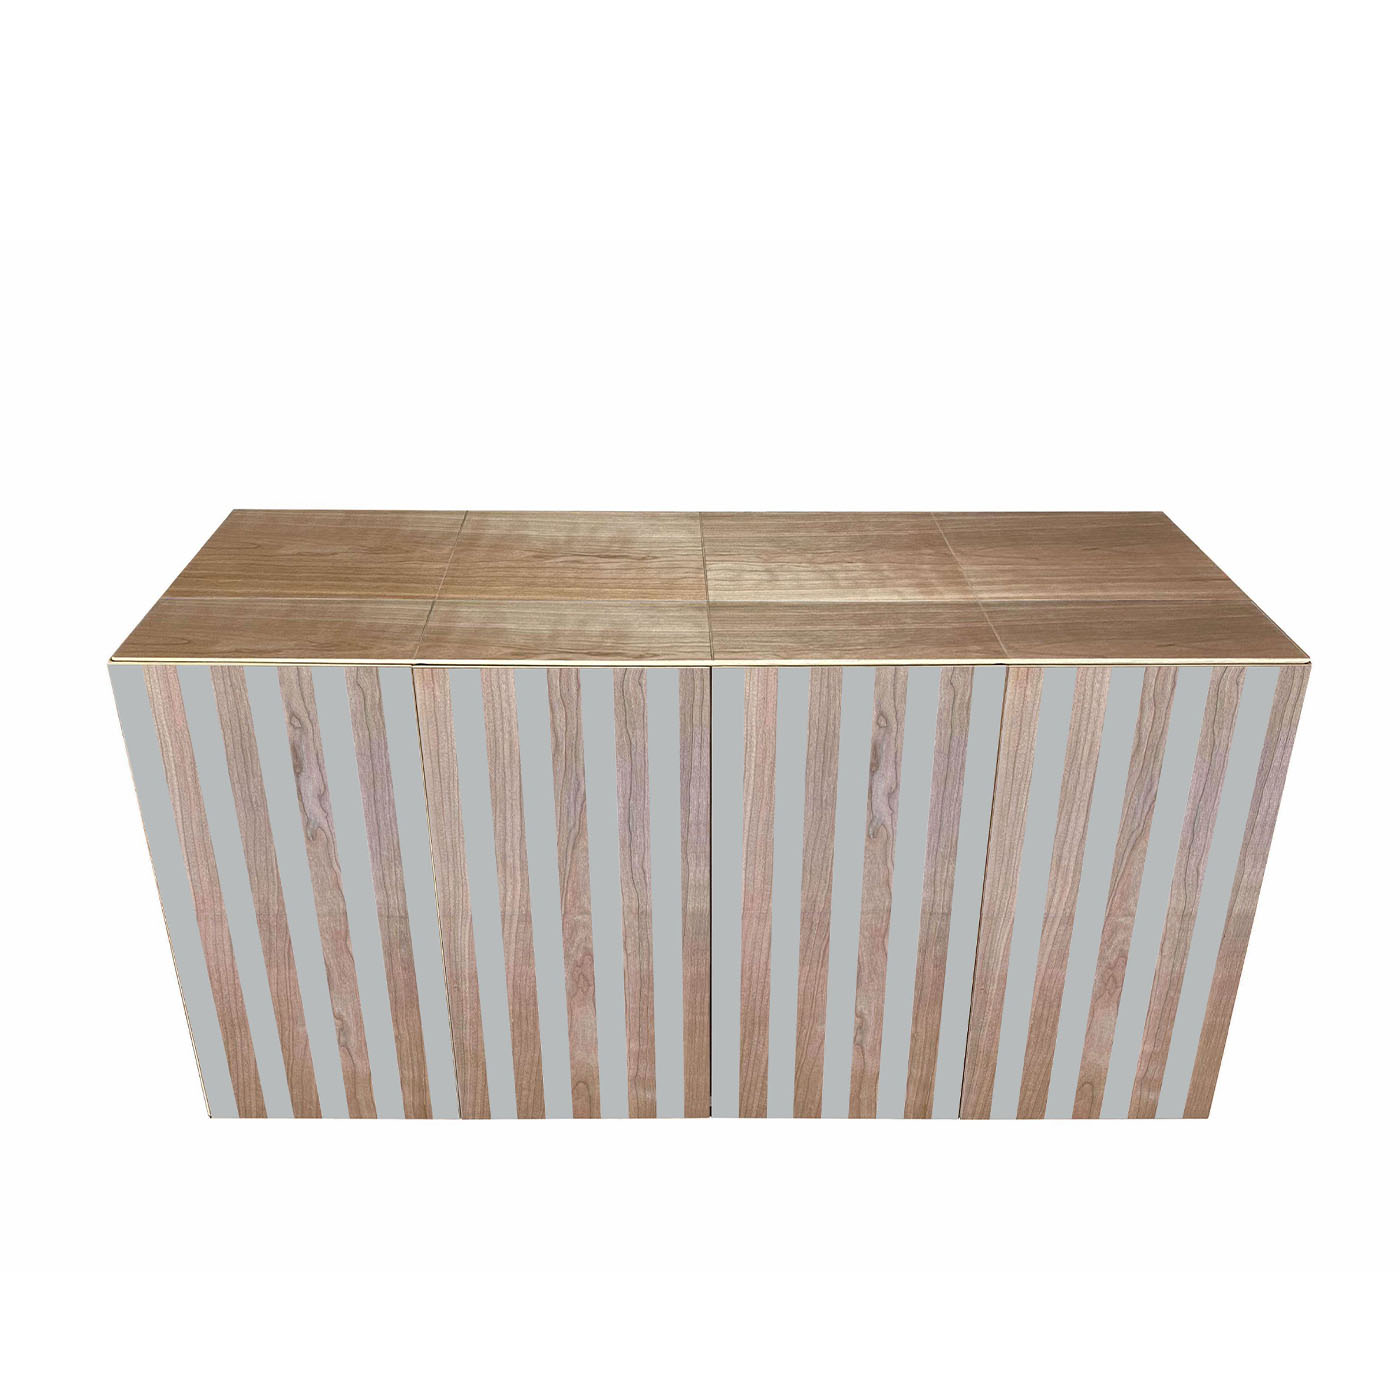 Md2 4-Door Striped Sideboard by Meccani Studio - Alternative view 1